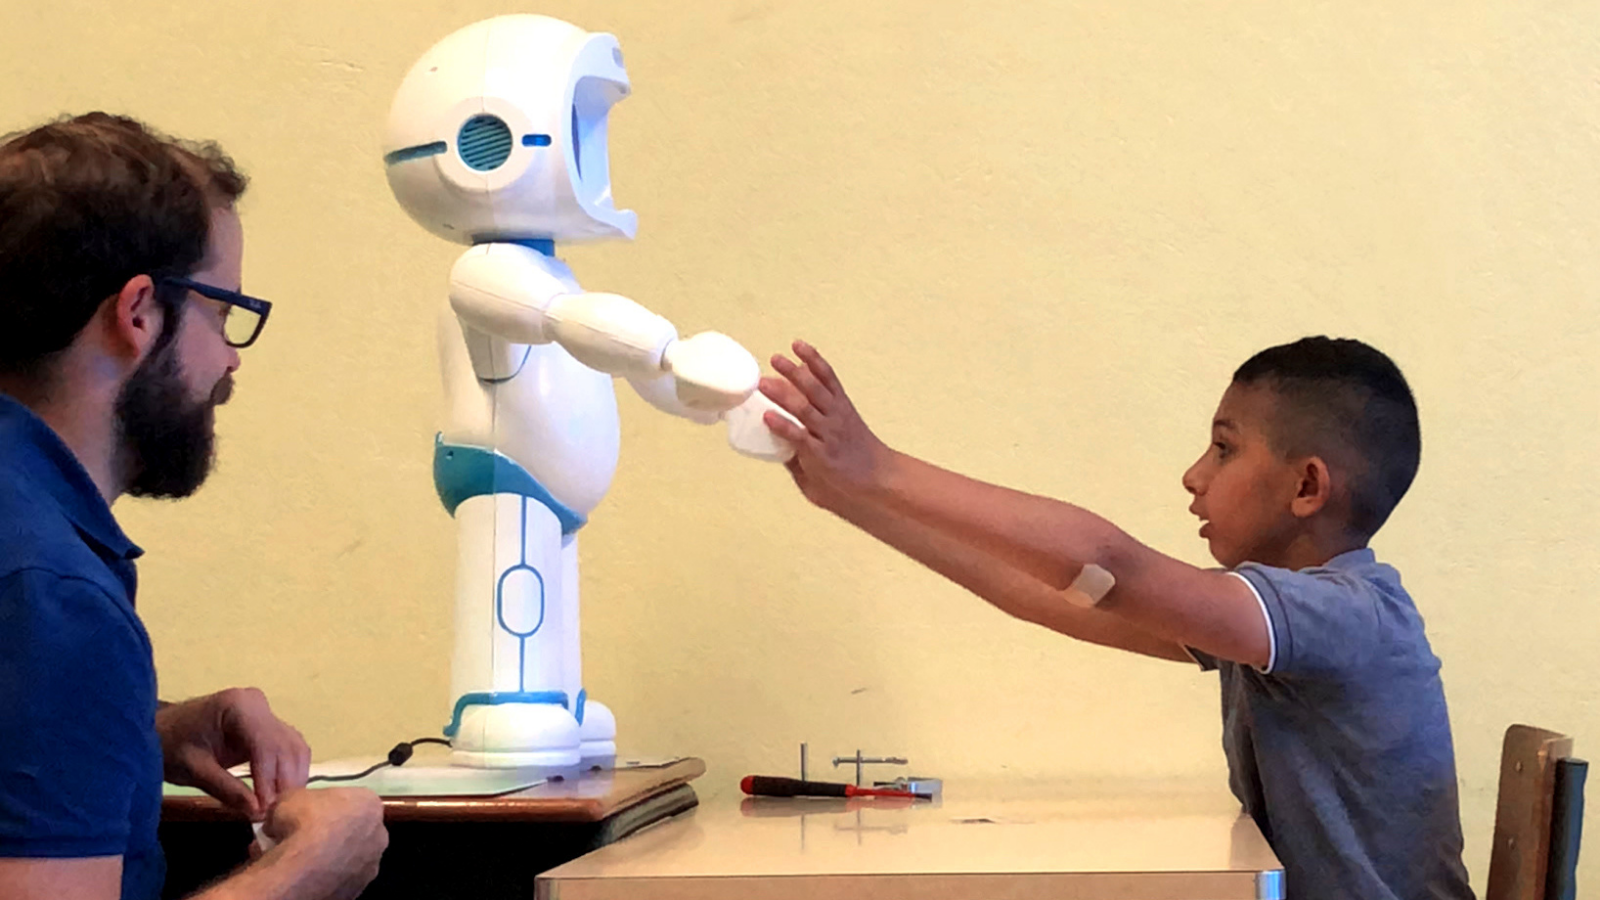 Can a robot open new doors to teach social interaction to children with autism?